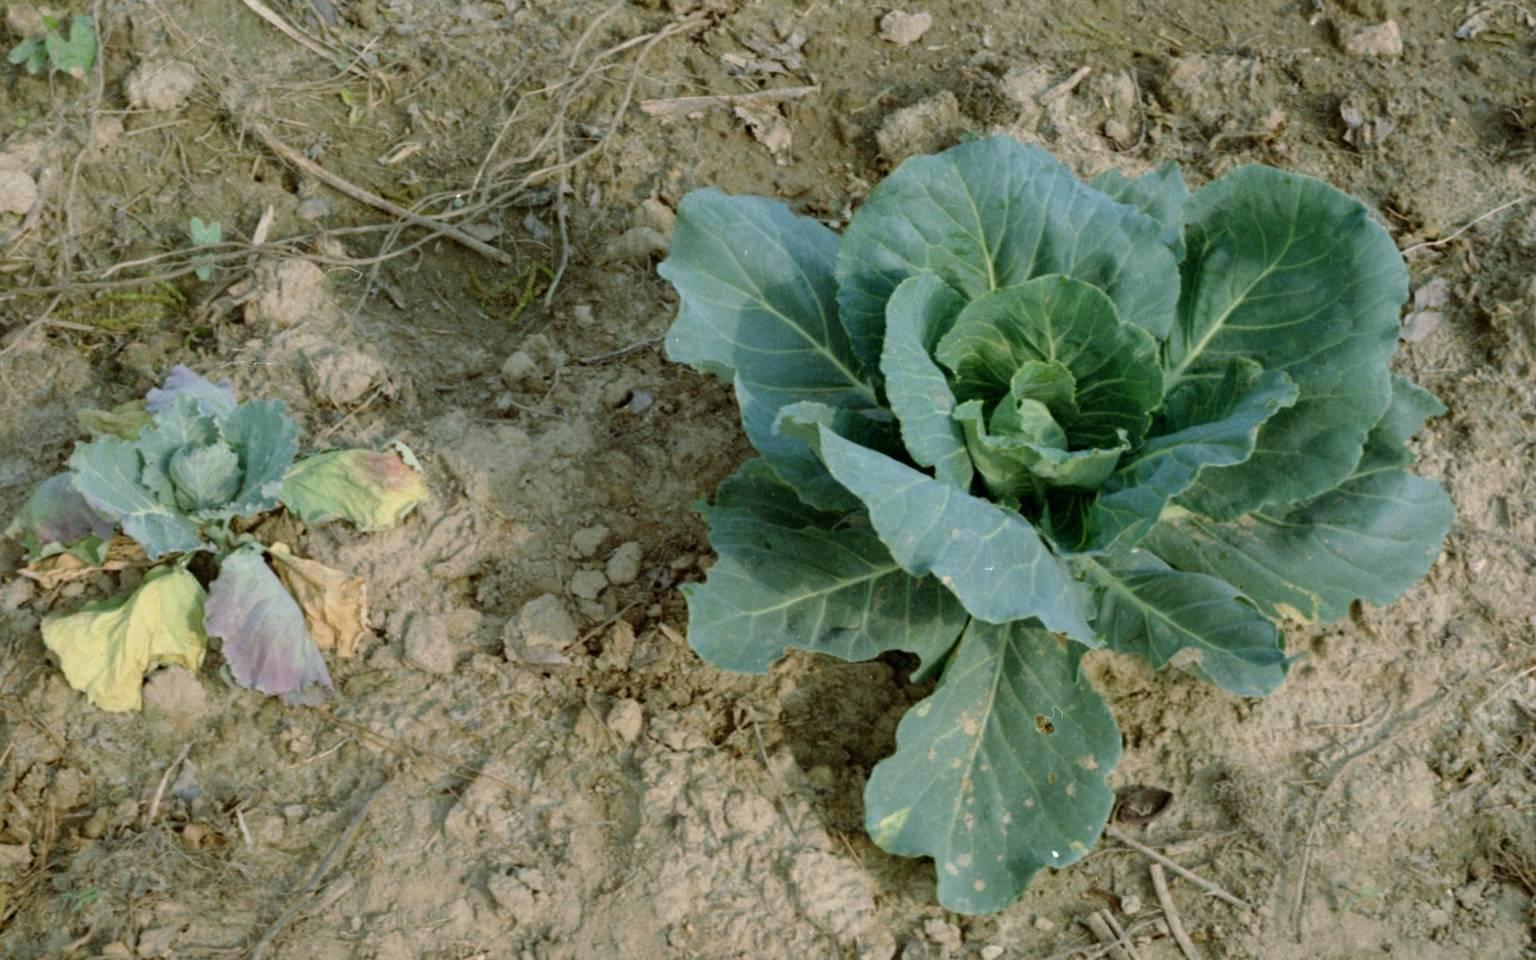 Cabbage on left is infested with seedcorn maggot Photo: Clemson University - USDA Cooperative Extension Slide Series, Bugwood.org